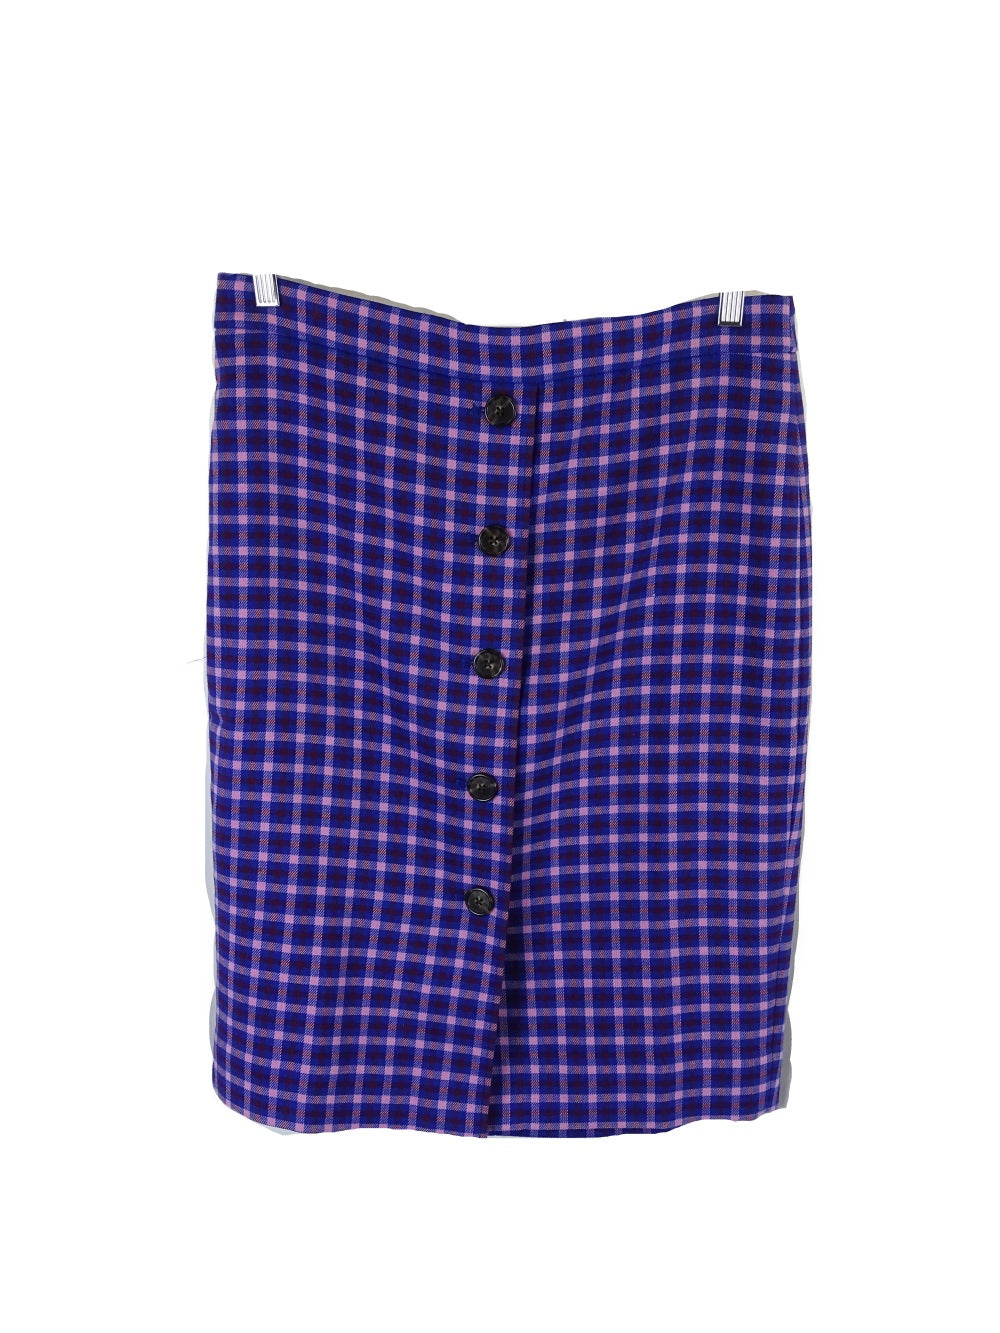 J. Crew Blue and Pink Plaid Skirt 10